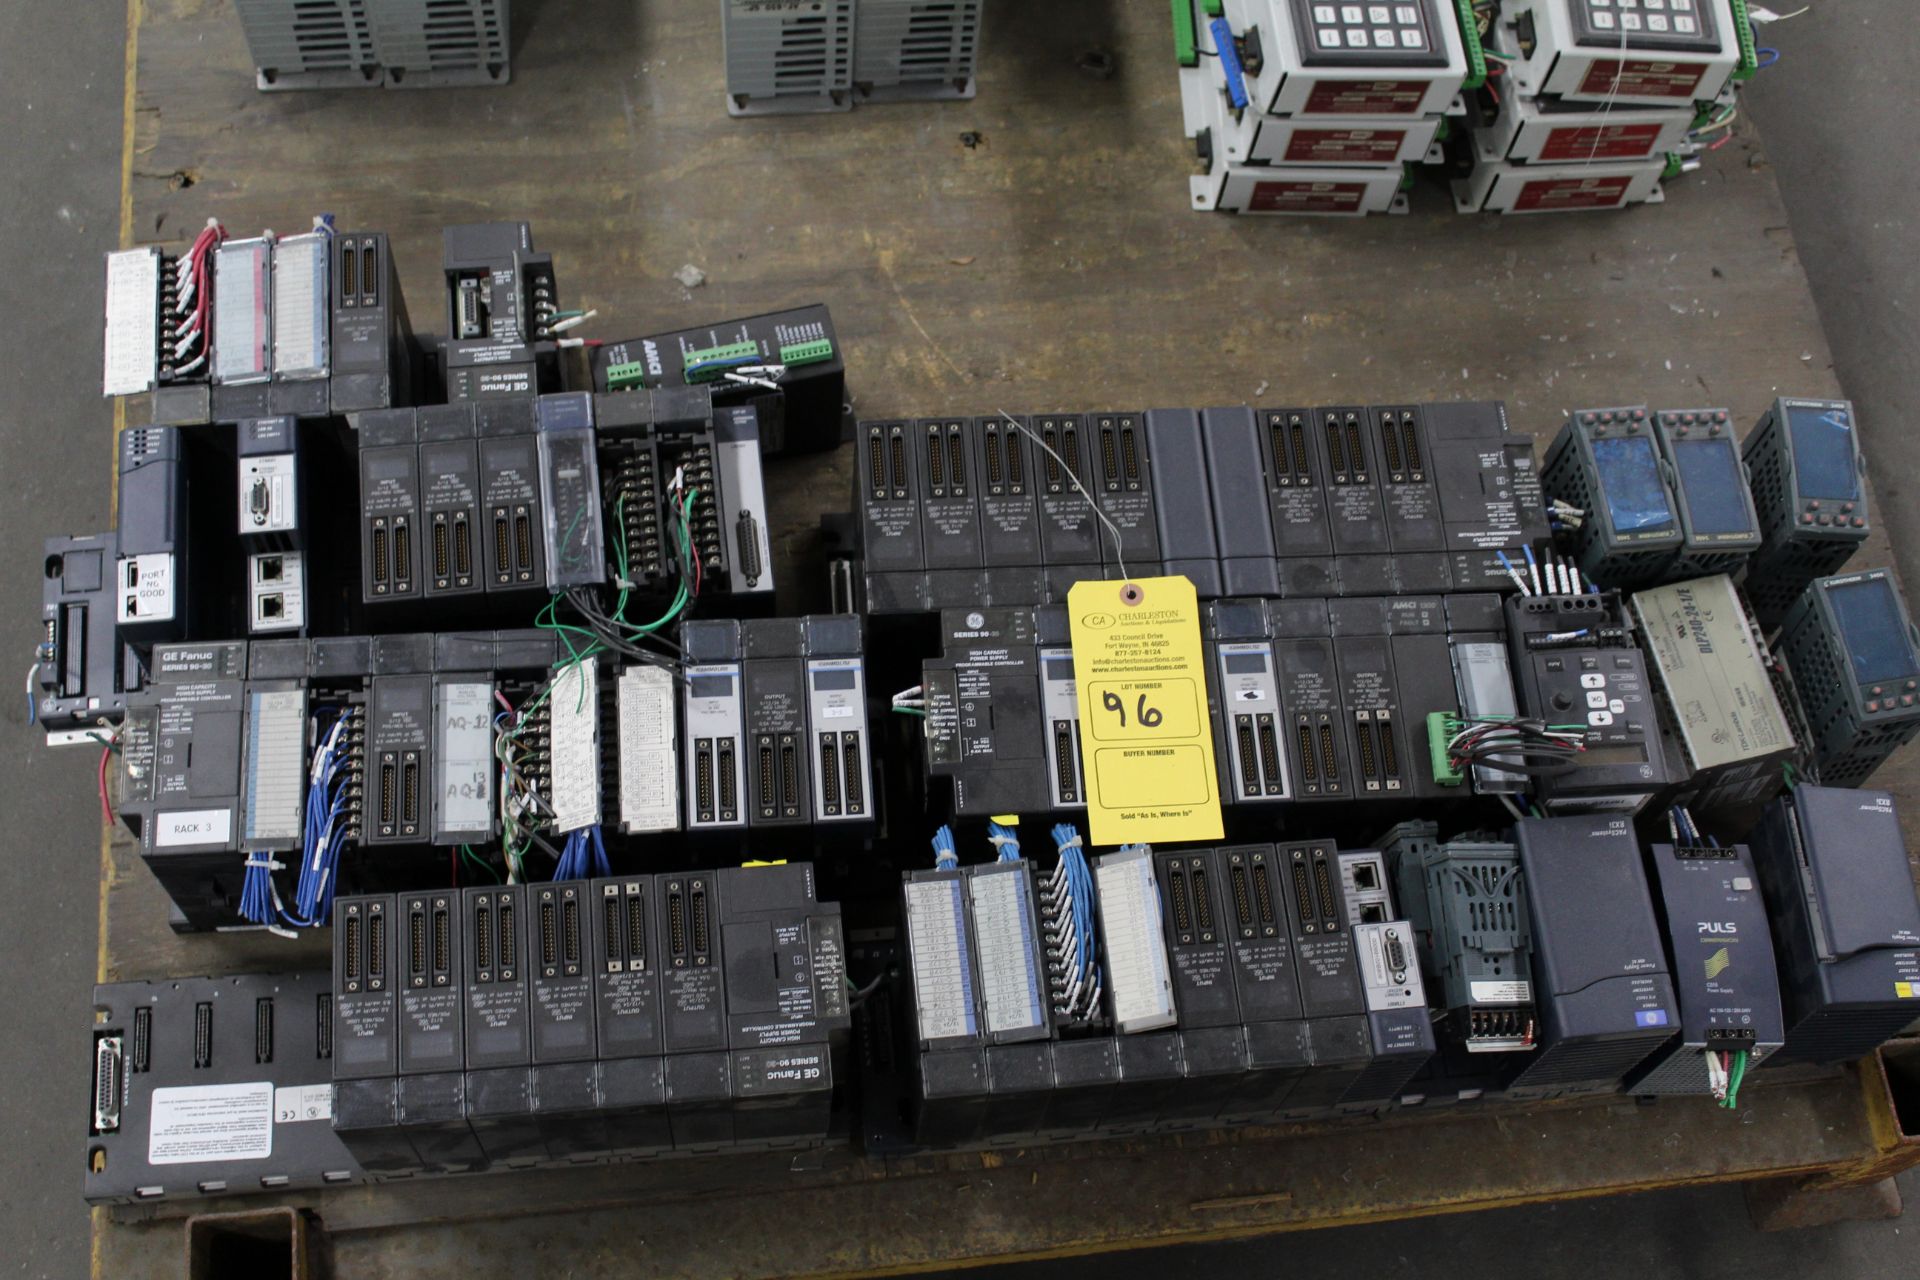 (7) GE FANUC SERIES 90-30 PROGRAMMABLE CONTROLLERS; (4) EUROTHERM 2408 TEMP CONTROL; (2) GE FANUC